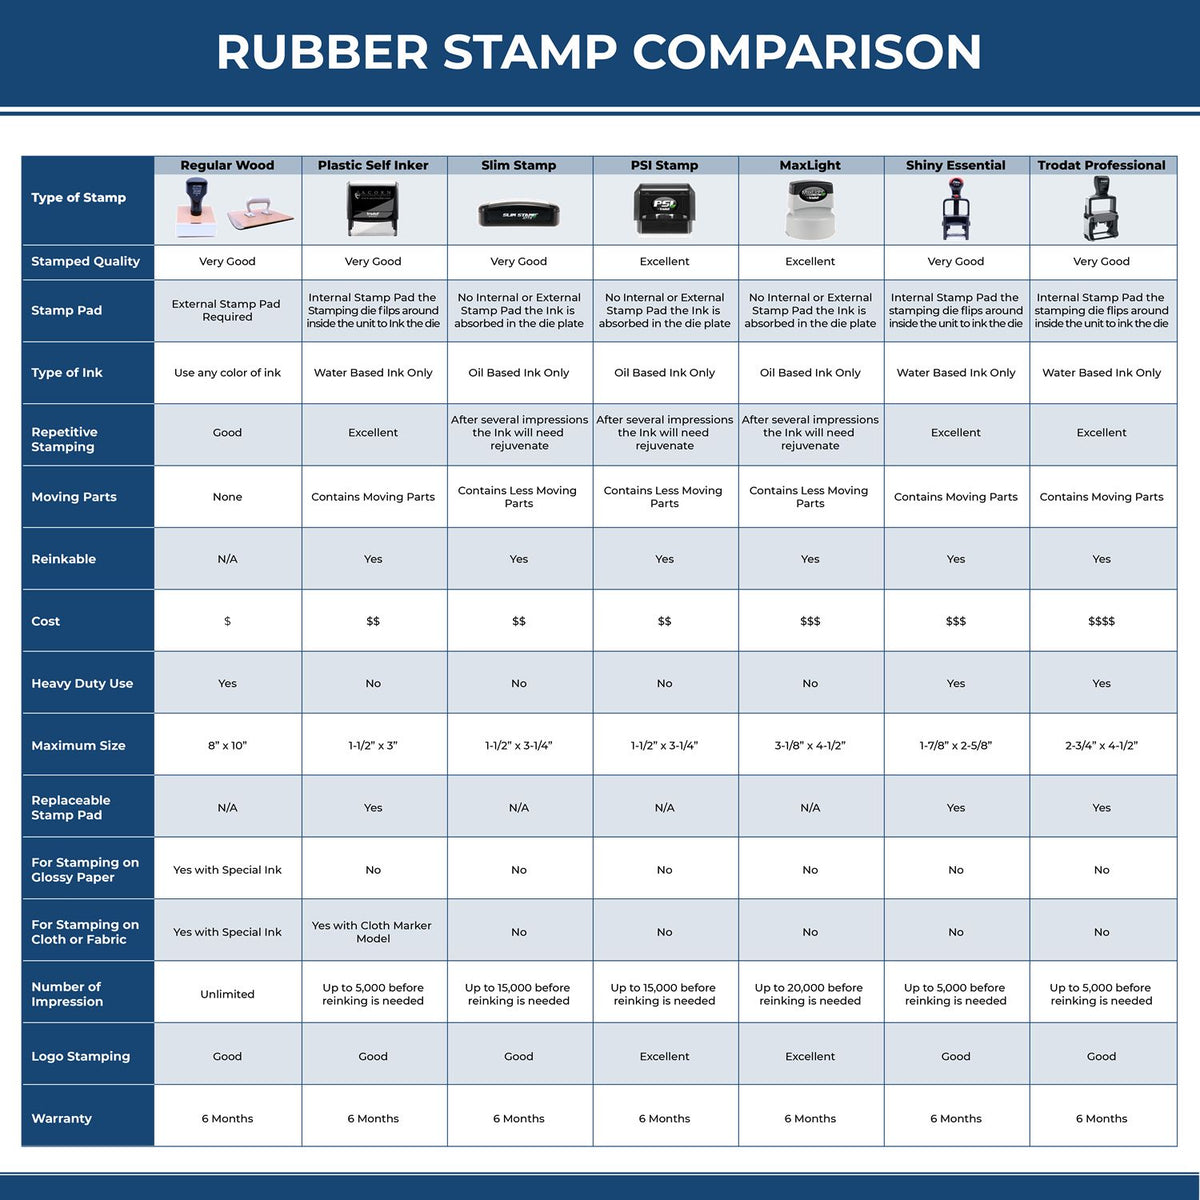 Mailed with Date Line Rubber Stamp 4193R Rubber Stamp Comparison